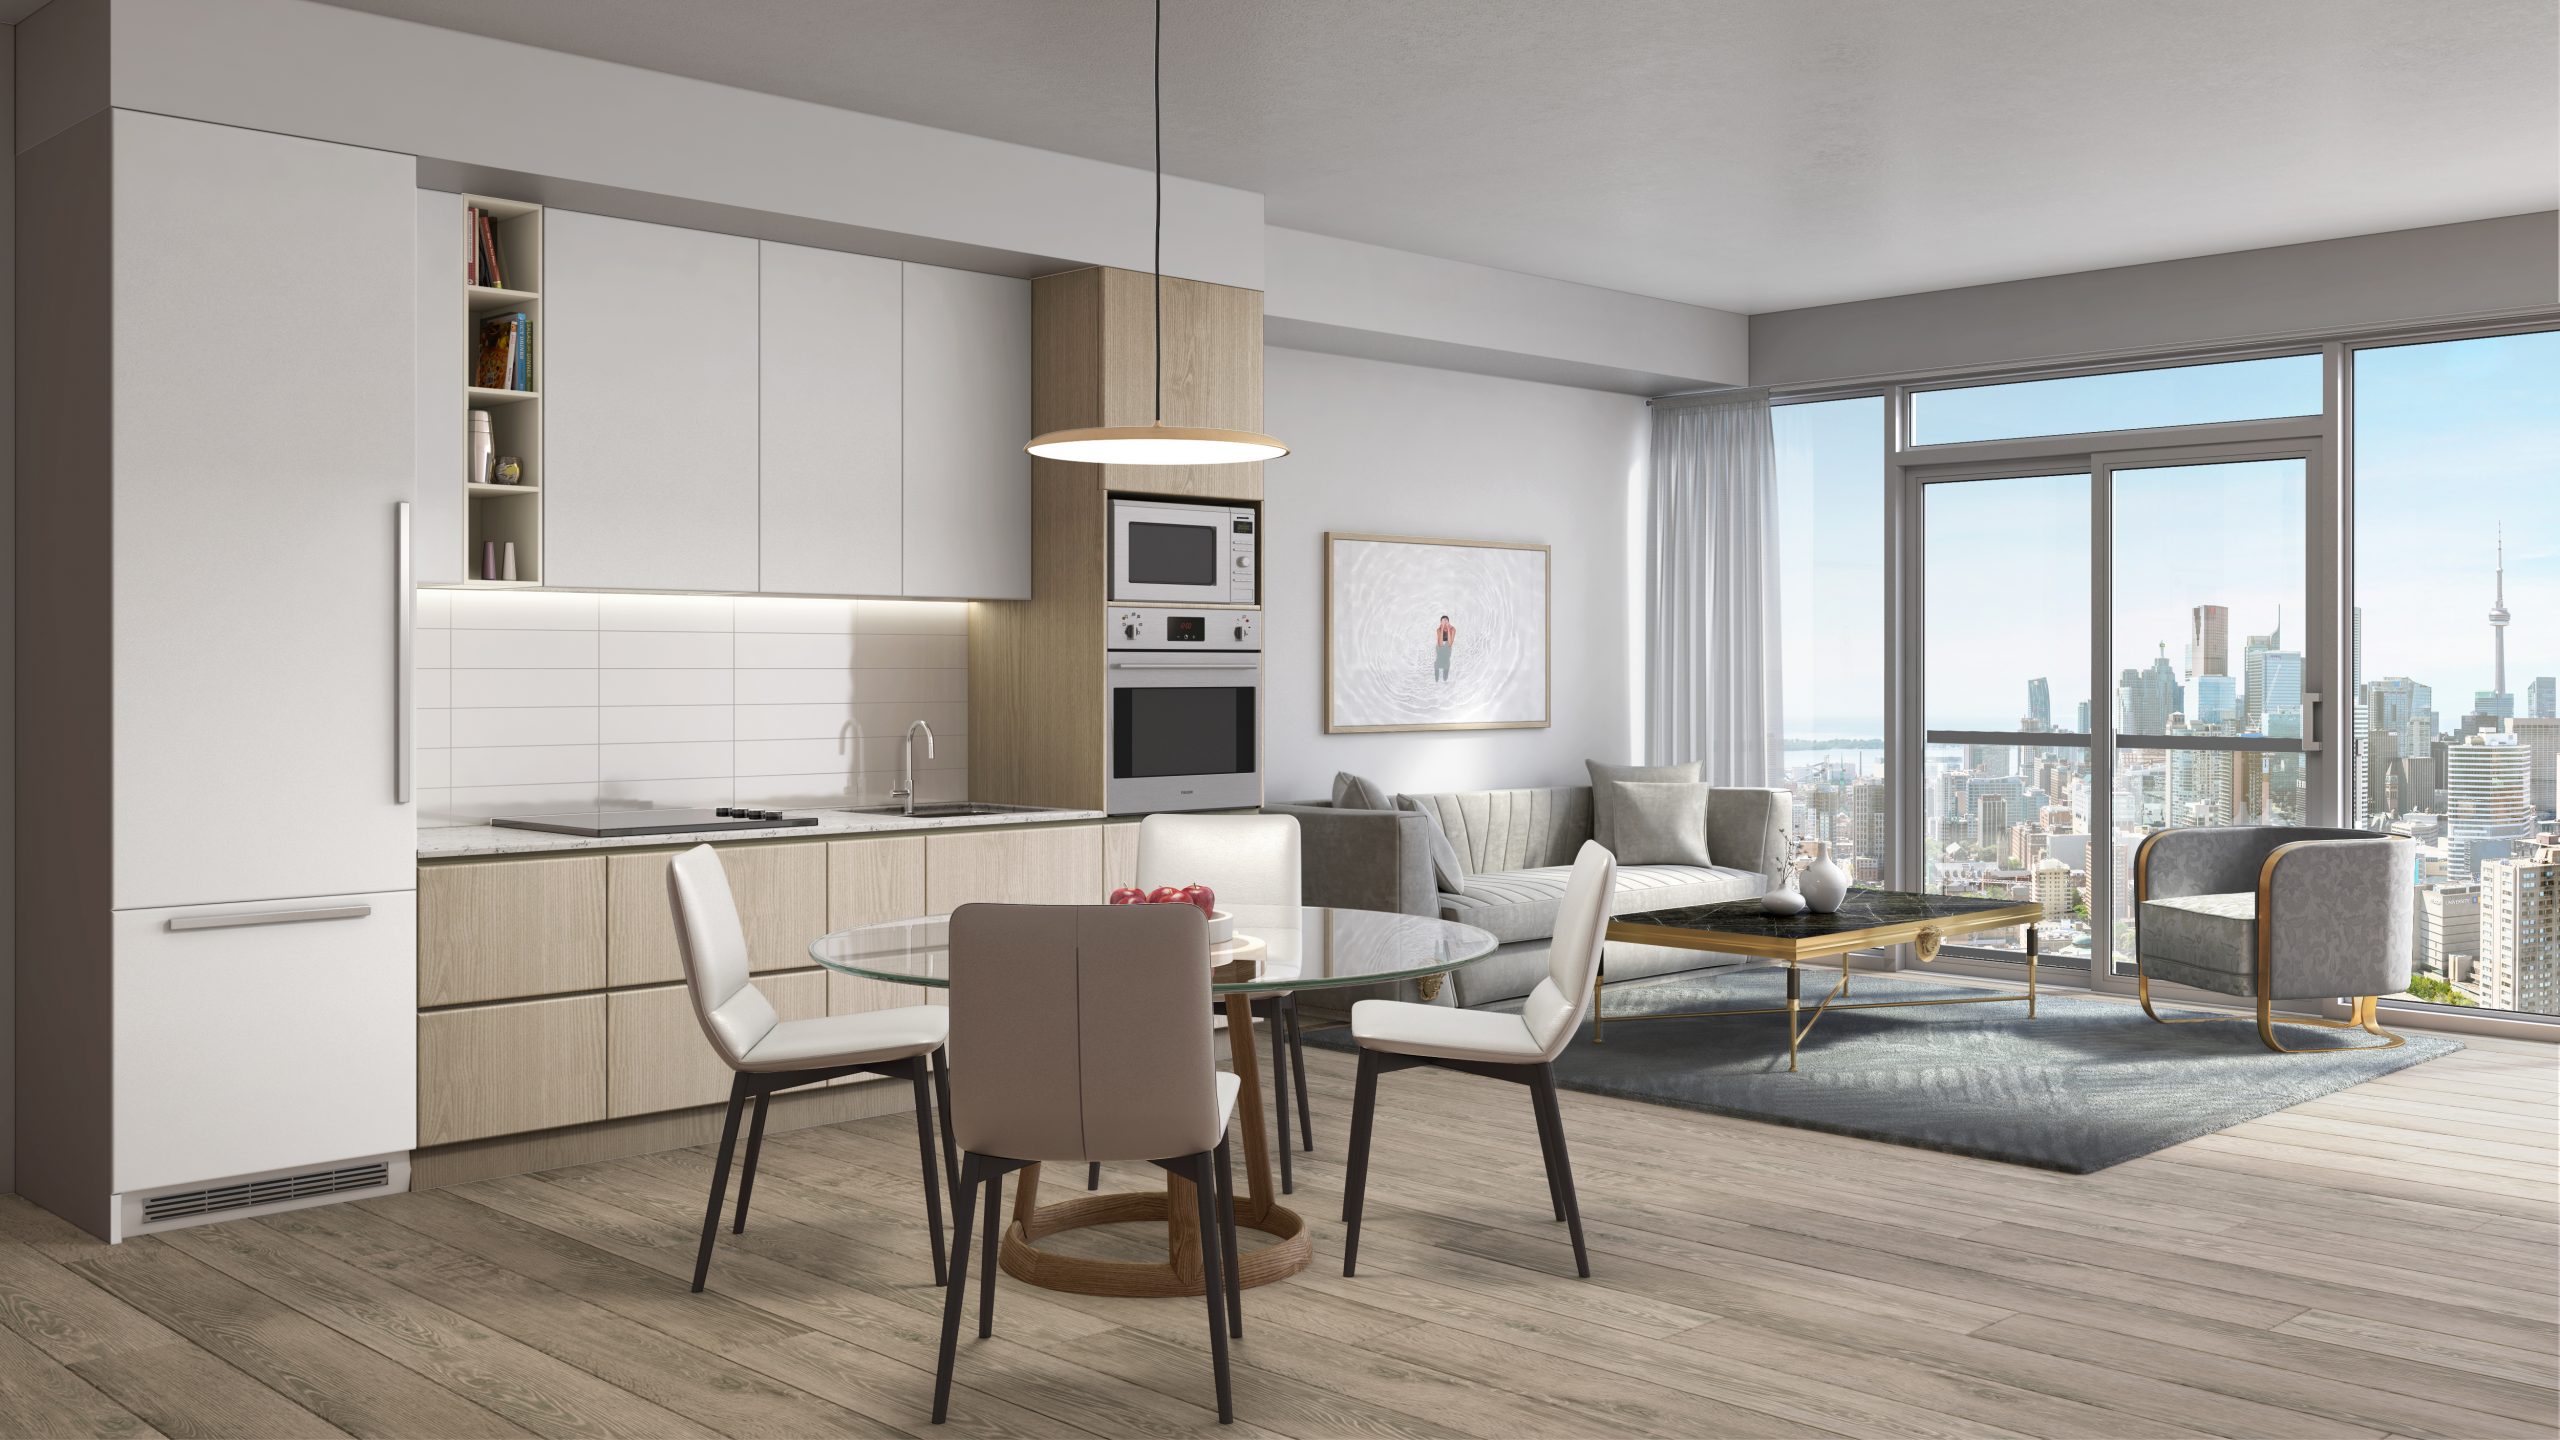 Interior kitchen, dining and living space at Prime Condos